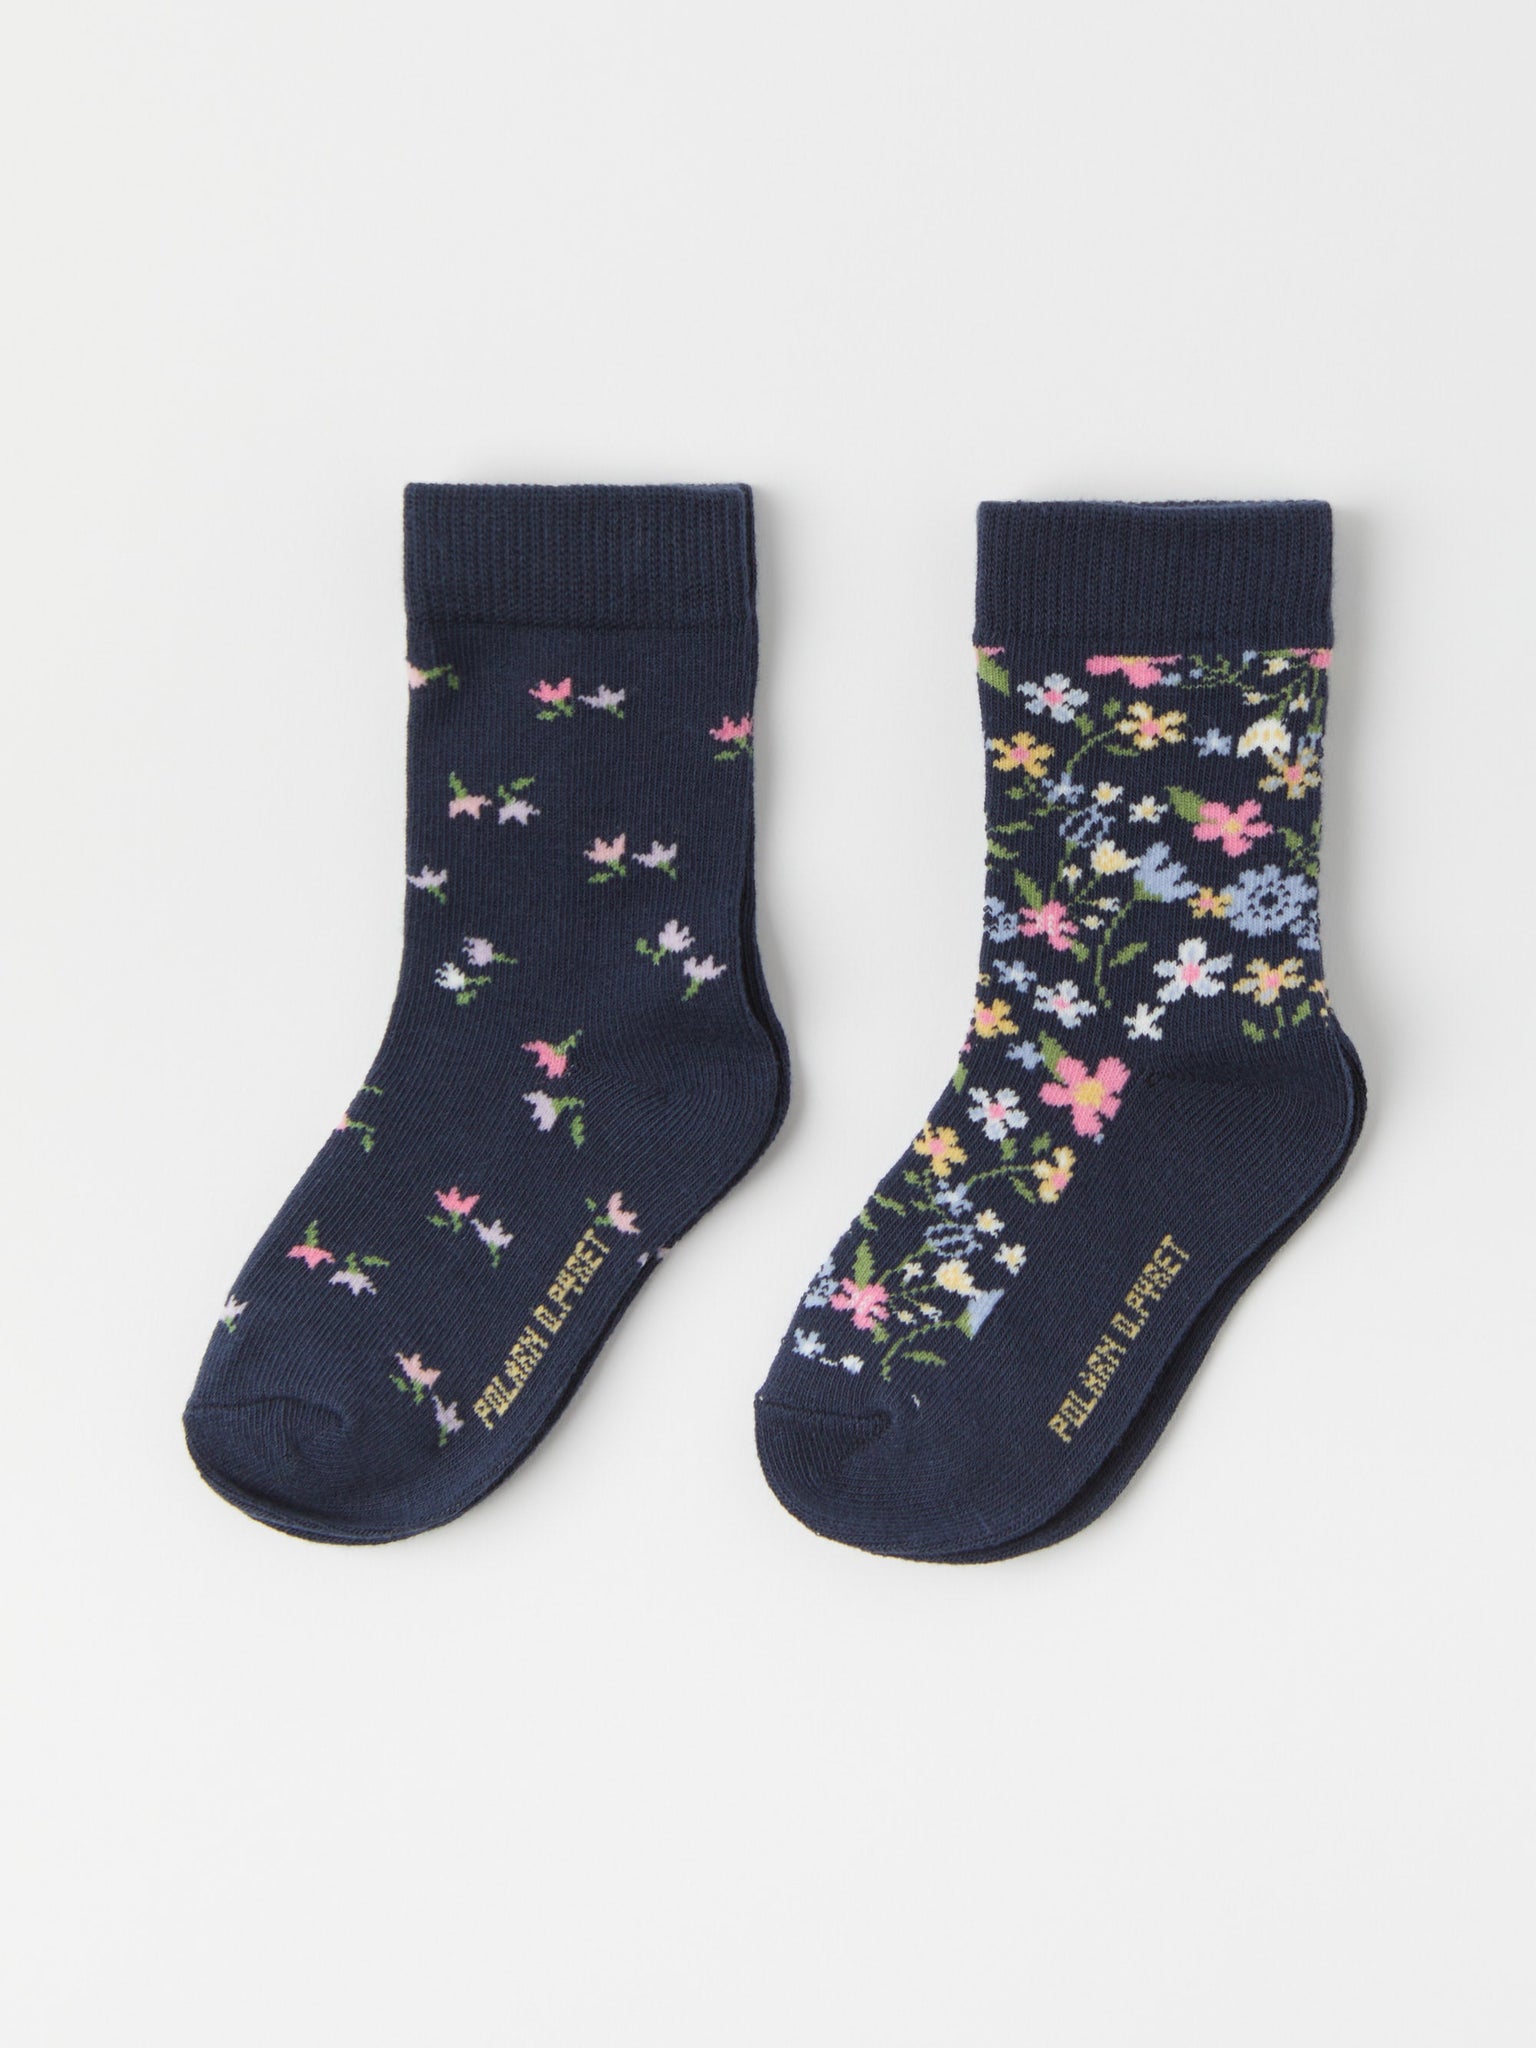 Two Pack Floral Kids Socks from the Polarn O. Pyret kidswear collection. Ethically produced kids clothing.